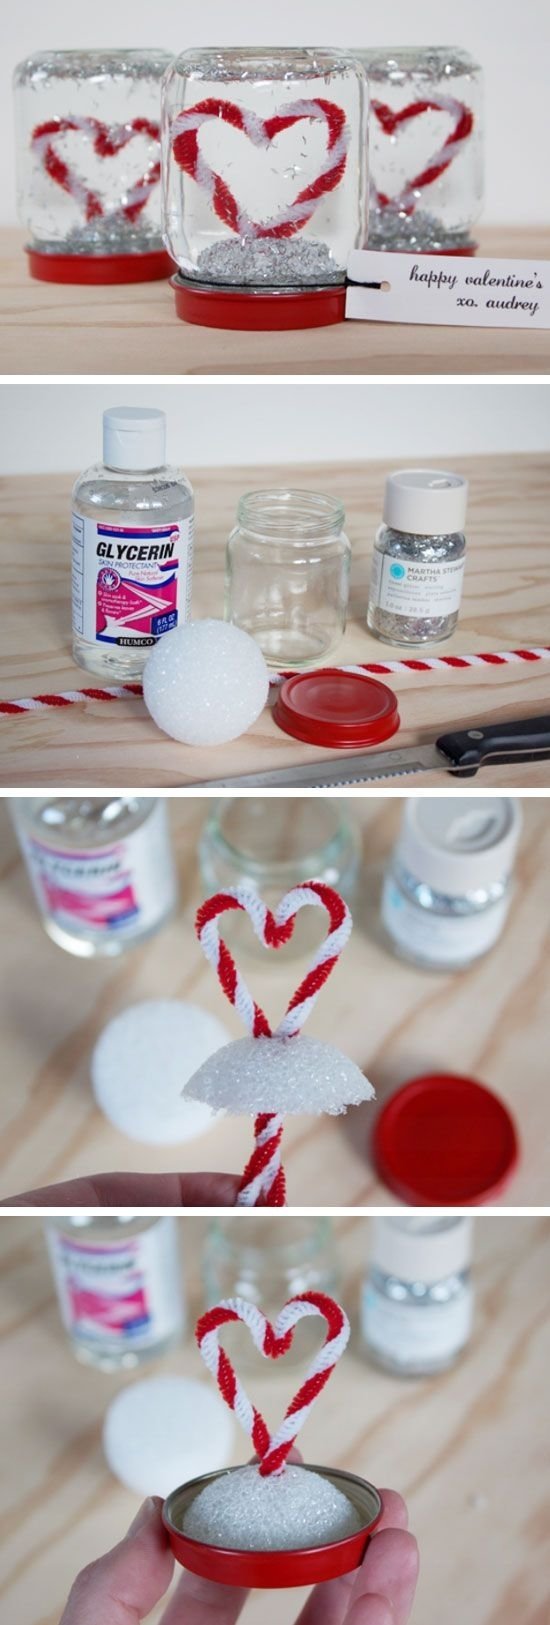 10 Wonderful Valentines Day Ideas For Teenage Couples 246 best valentines images on pinterest glass jars jars and mason 2023